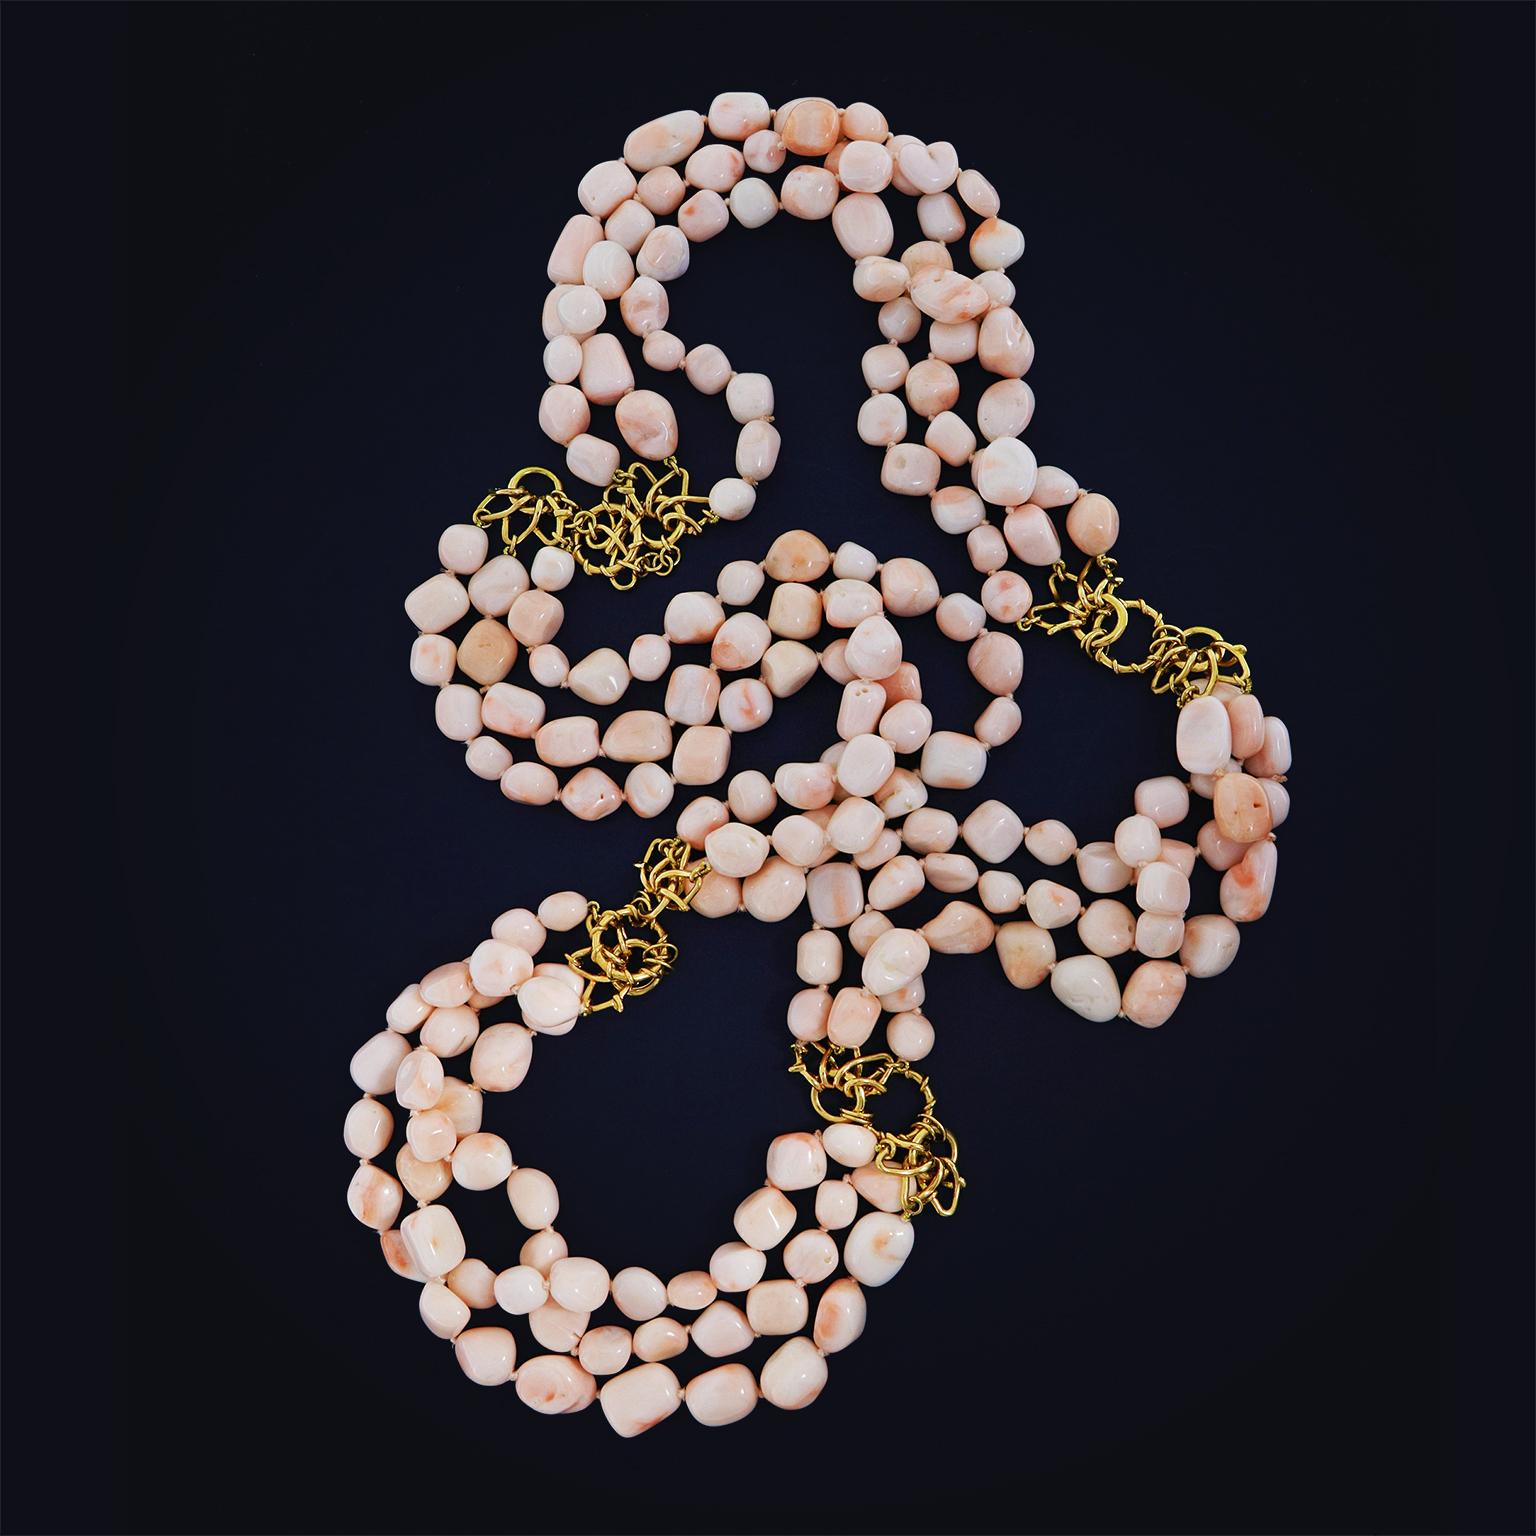 The soft hue of angel skin coral is elevated by carved nuggets on three strands. 18k yellow gold Vs in connected to gold rings in three sets disperse throughout the necklace to connect the coral strands. The total weight of the corals is 230 carats.